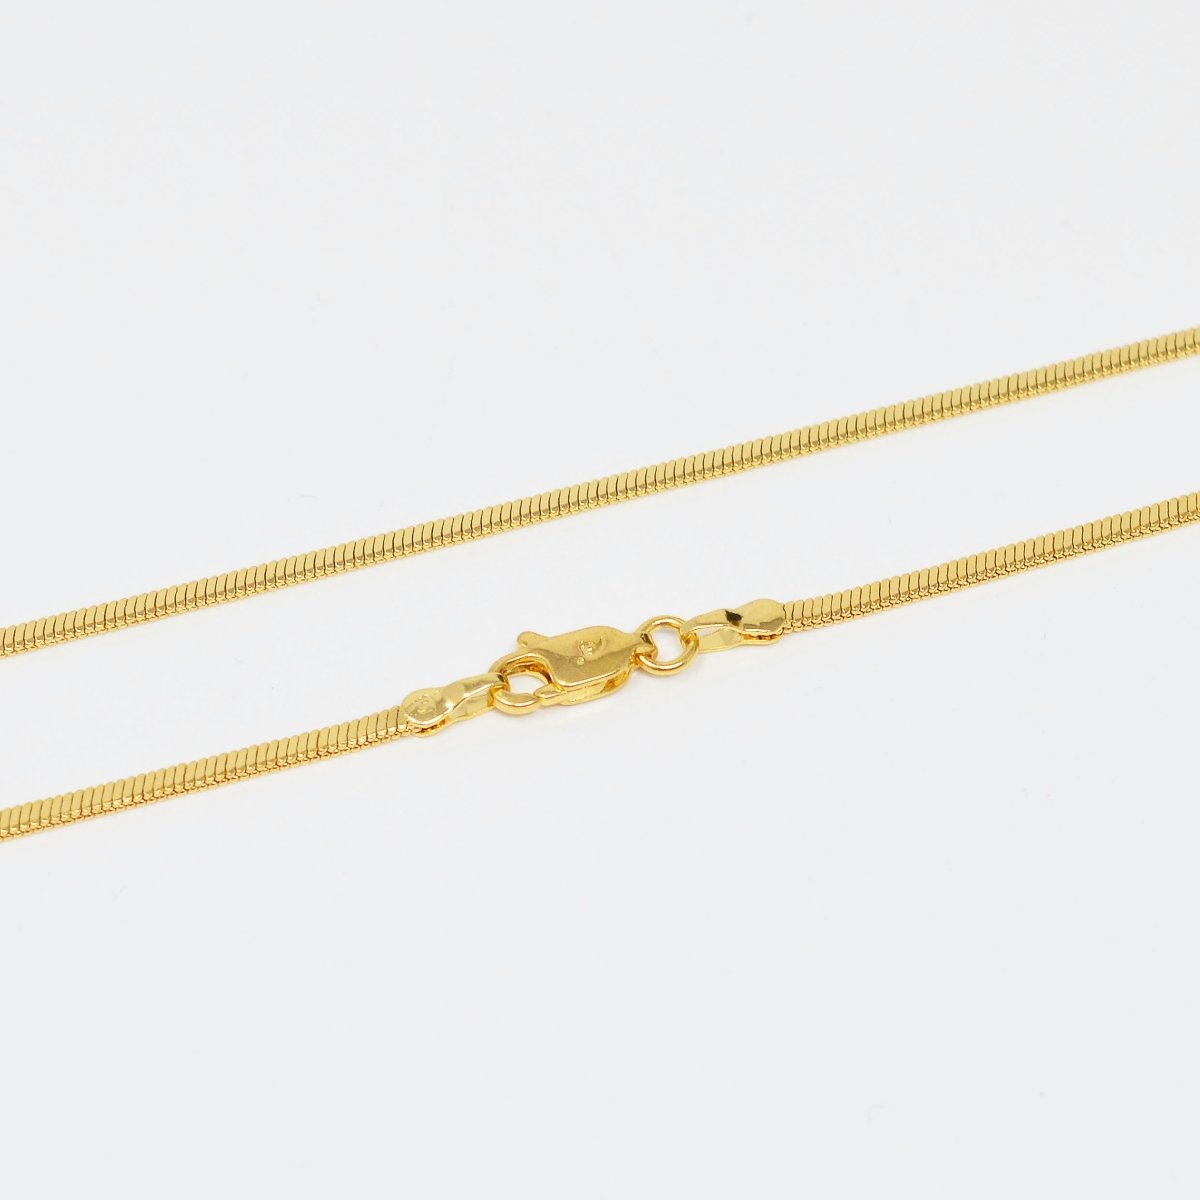 23.6 inch Omega Chain Necklace, 24K Gold Plated Omega Finished Necklace For Jewelry Making, Dainty 1.8mm Omega Necklace w/ Lobster Clasps | CN-998 Clearance Pricing - DLUXCA